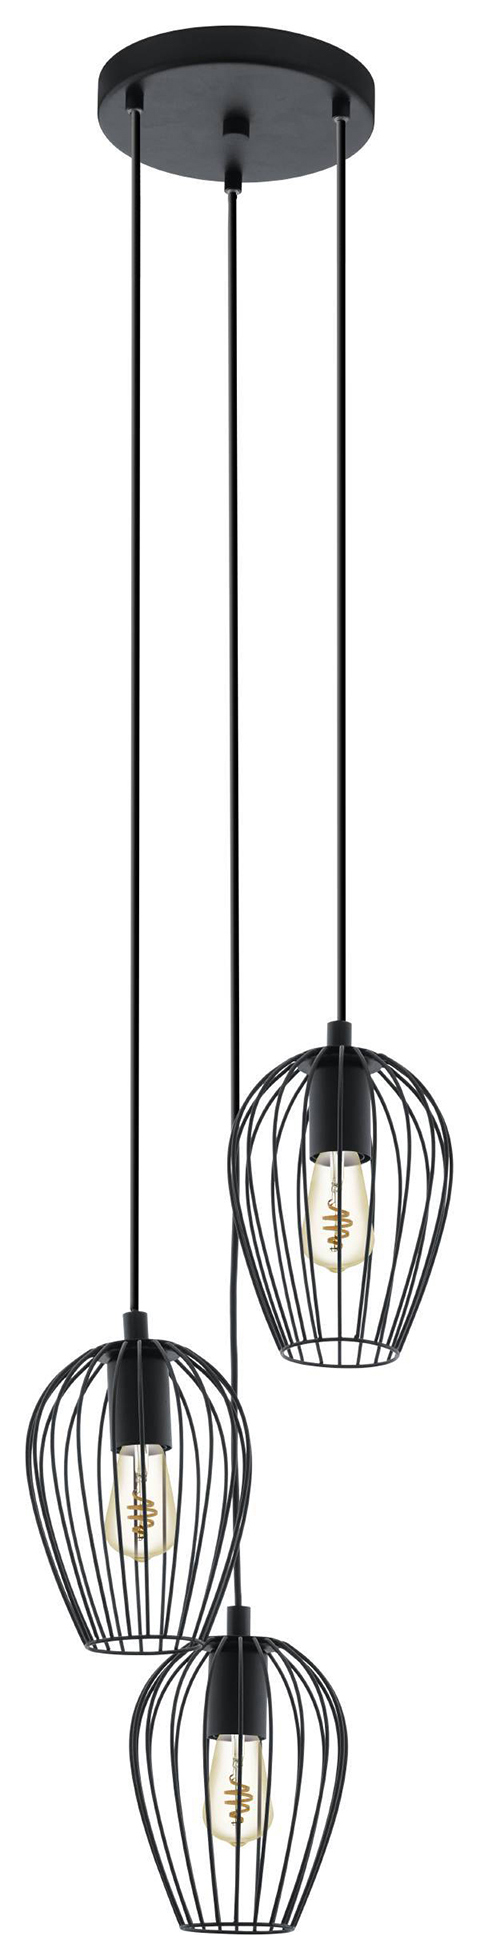 Eglo Newtown Vintage 3-Light Cluster Pendant with Caged Shades - Black